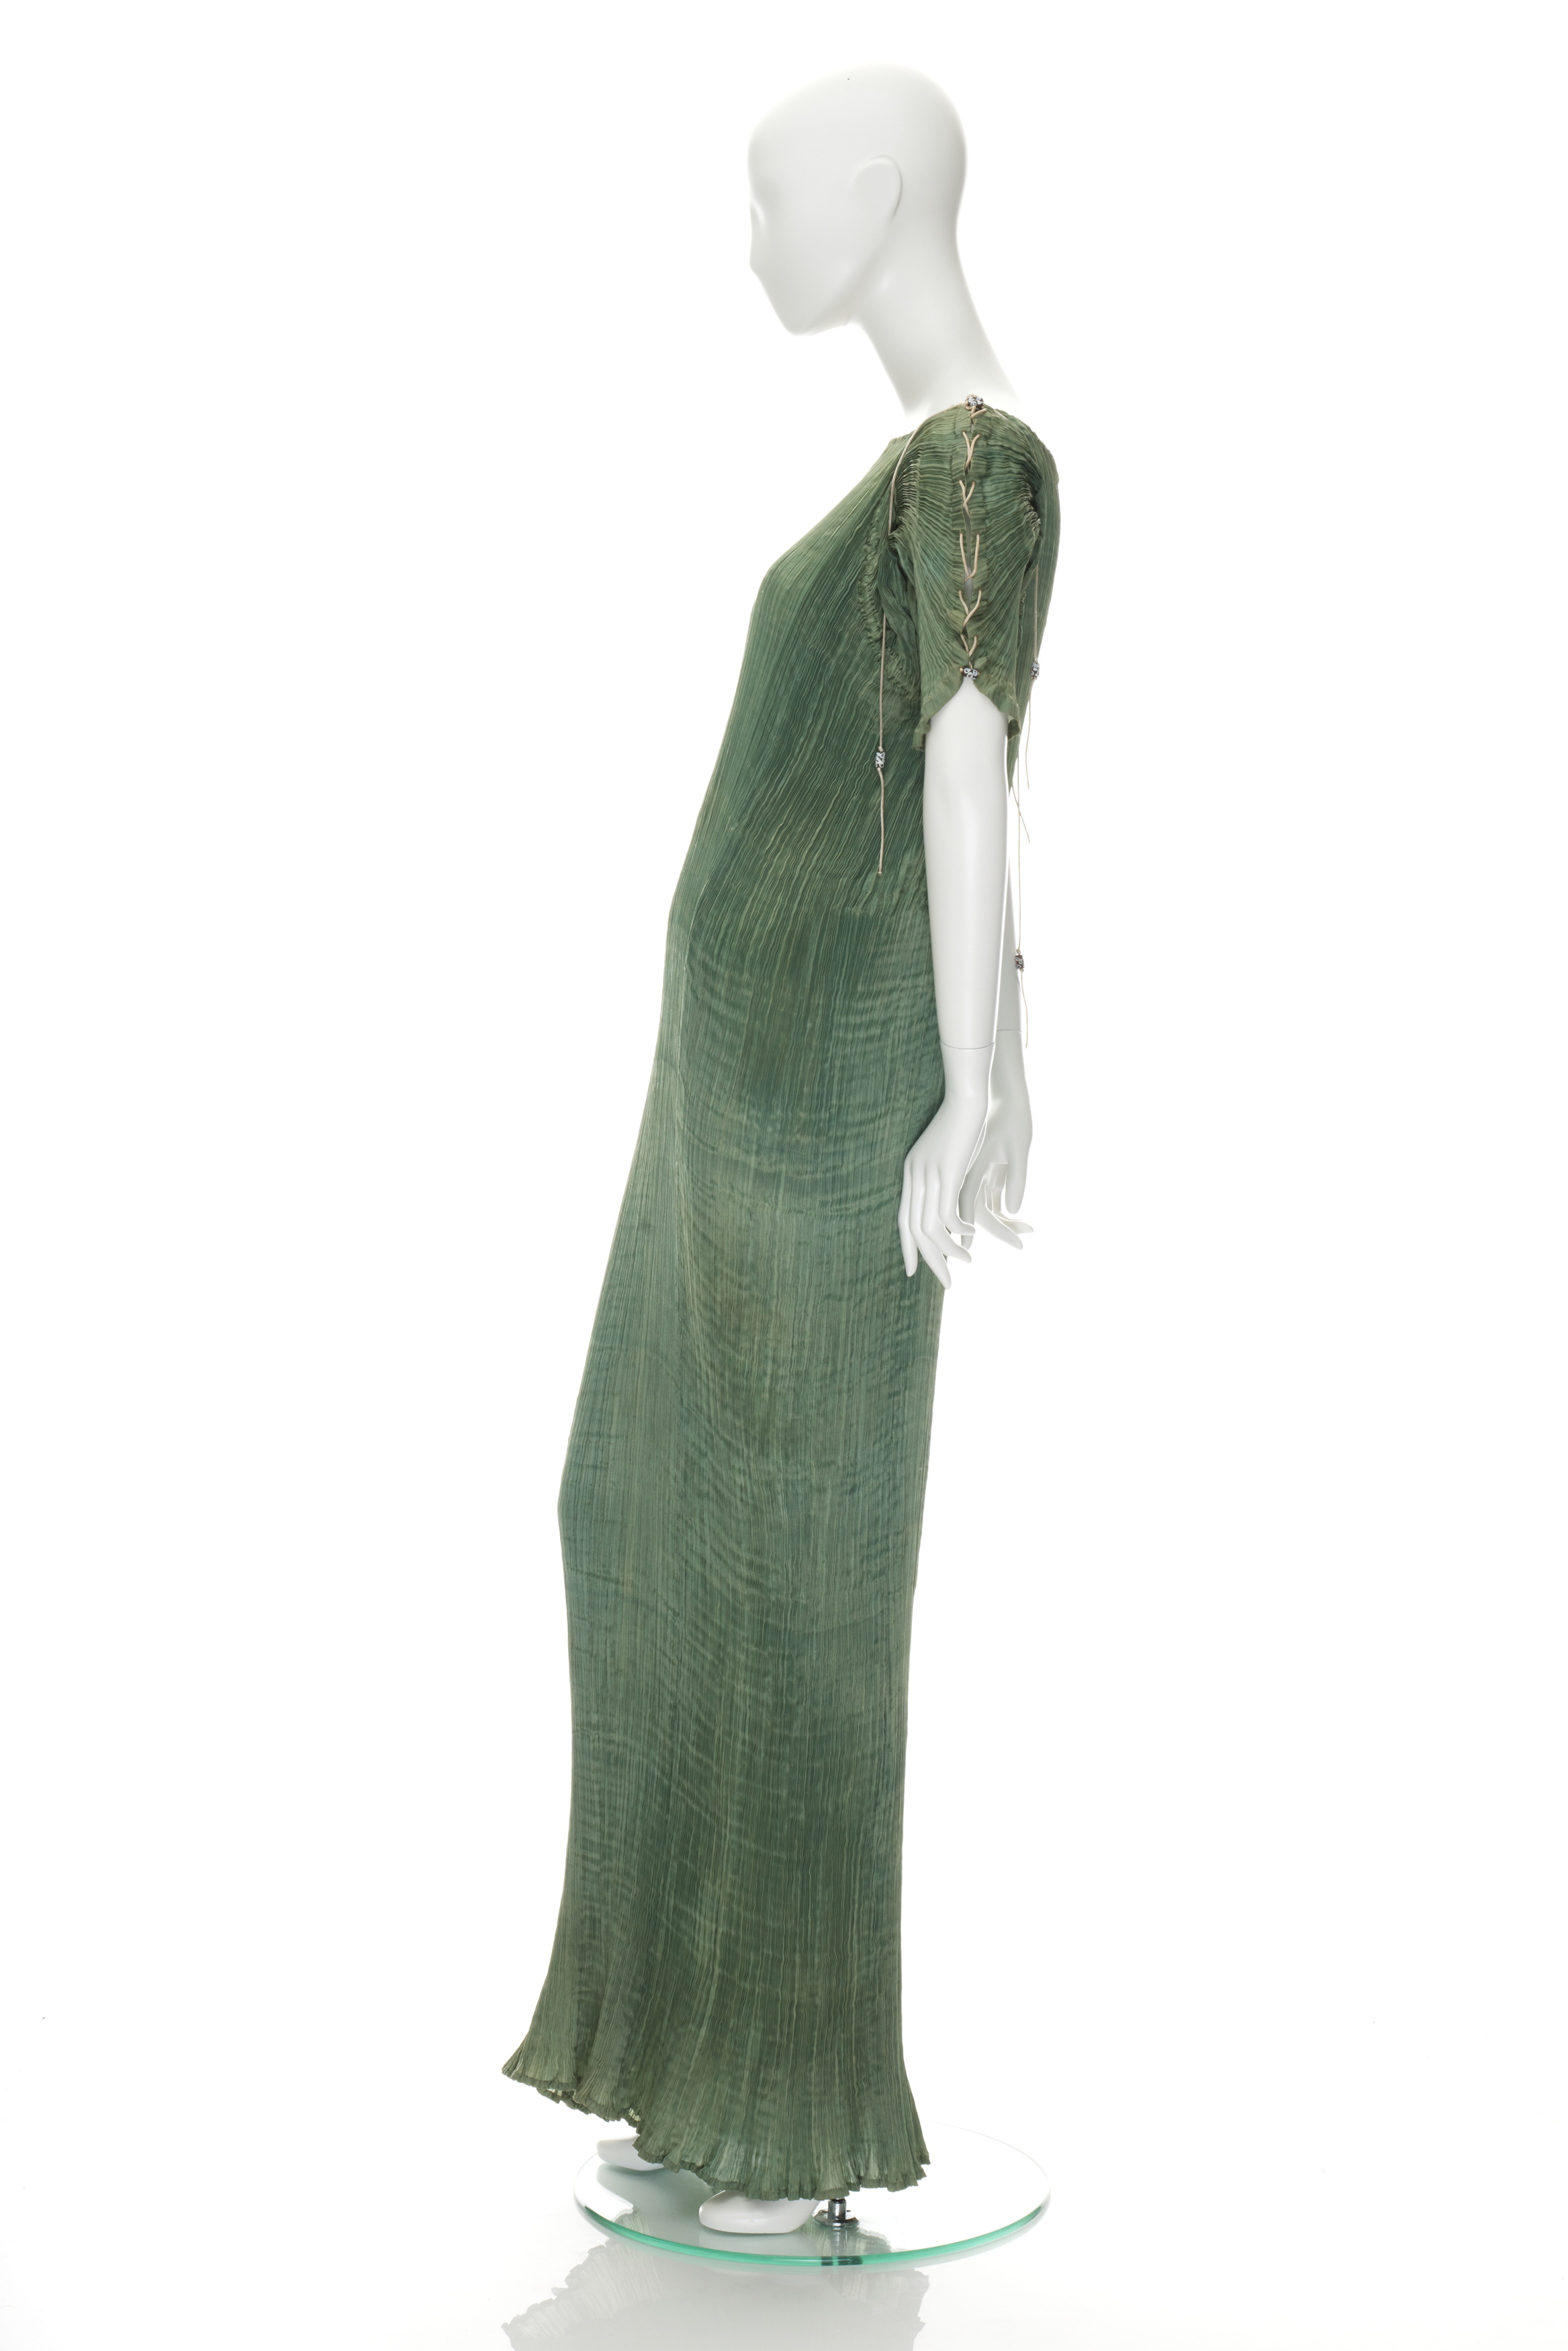 'Delphos' evening dress by Mariano Fortuny